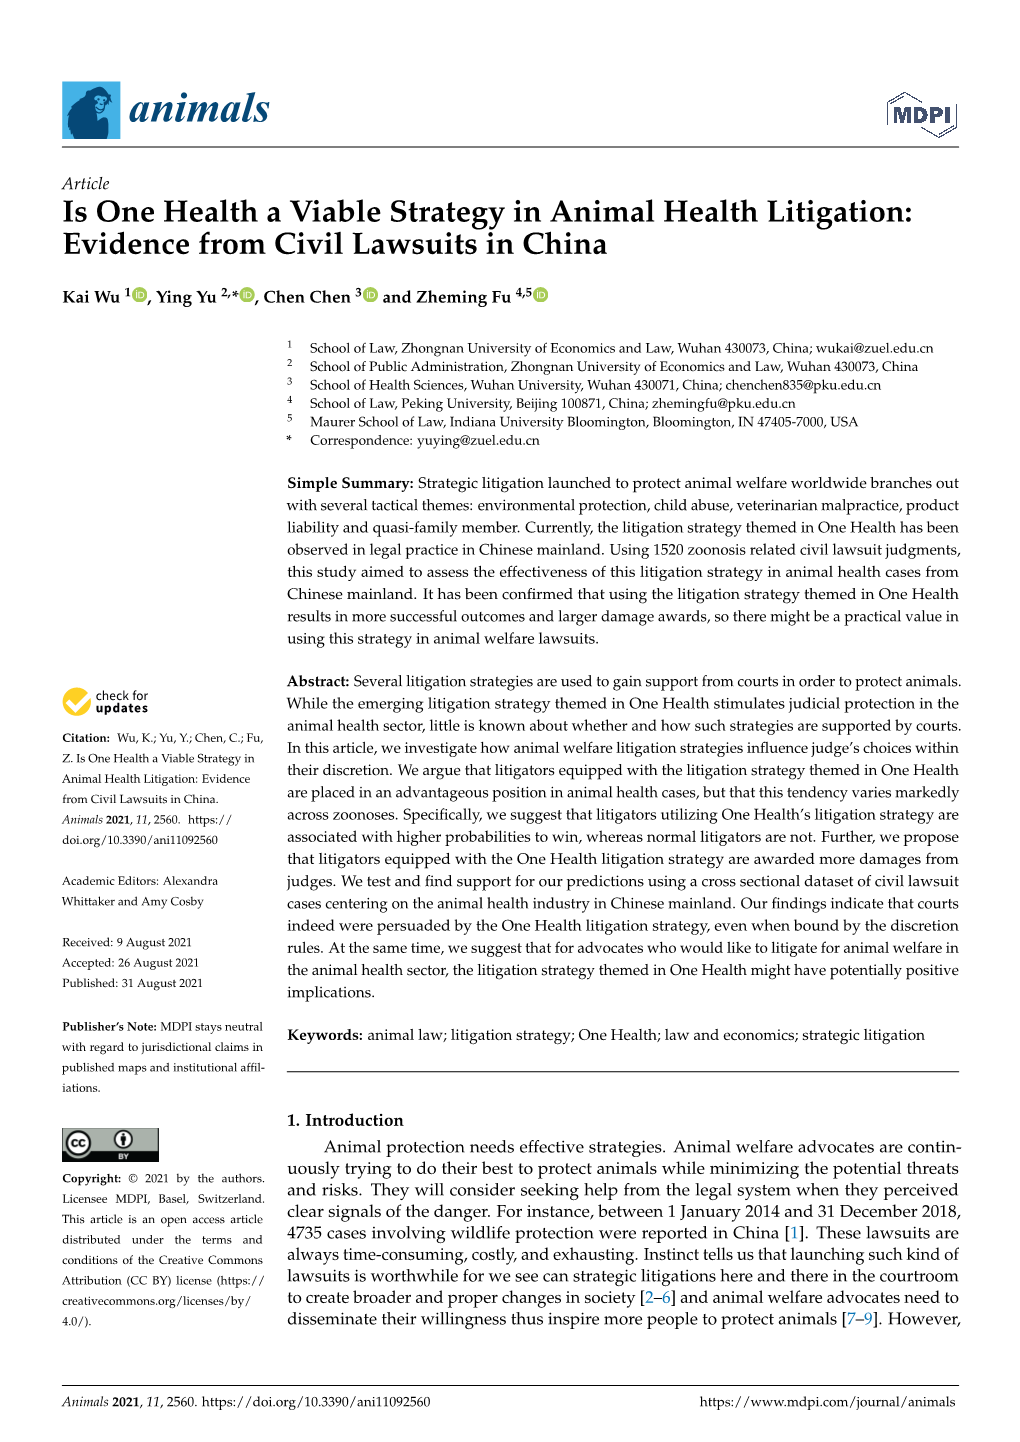 Is One Health a Viable Strategy in Animal Health Litigation: Evidence from Civil Lawsuits in China